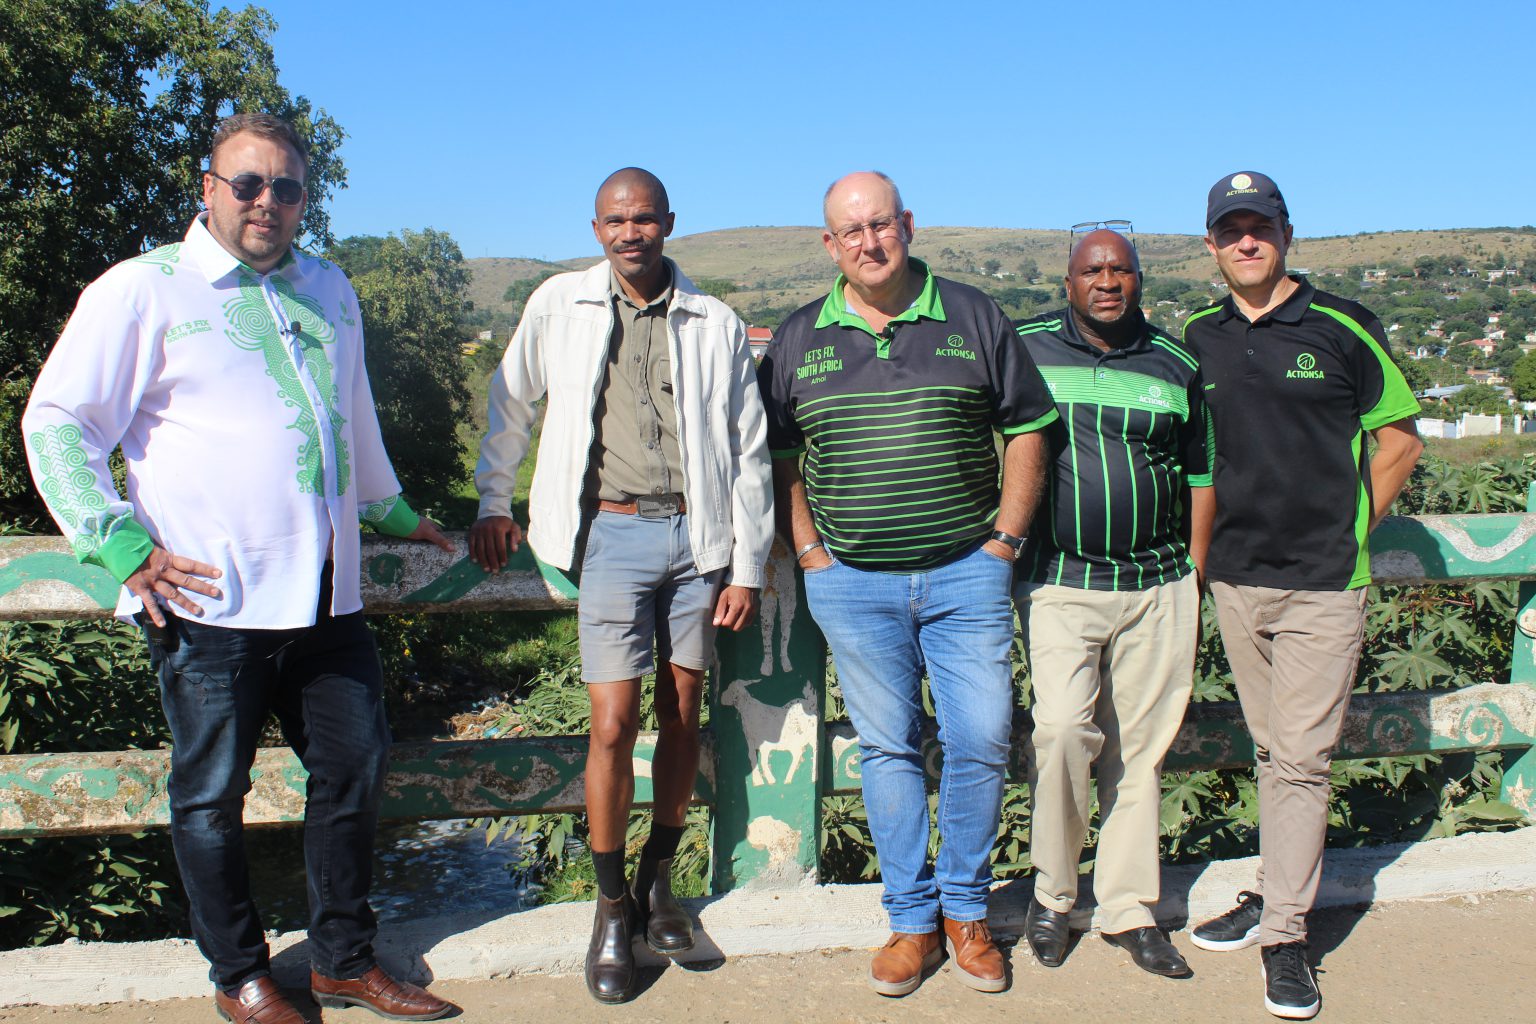 Discussing ways they can fix the sewage problem in Makhanda, were, from left, Michael Beaumont, Richard Alexandra, Athol Trollip, Monwabisi Tame and Pierre Le Roux at the Matyana Bridge during the sanitation tour of Makhanda by ActionSA. Photo: Selenathi Botha